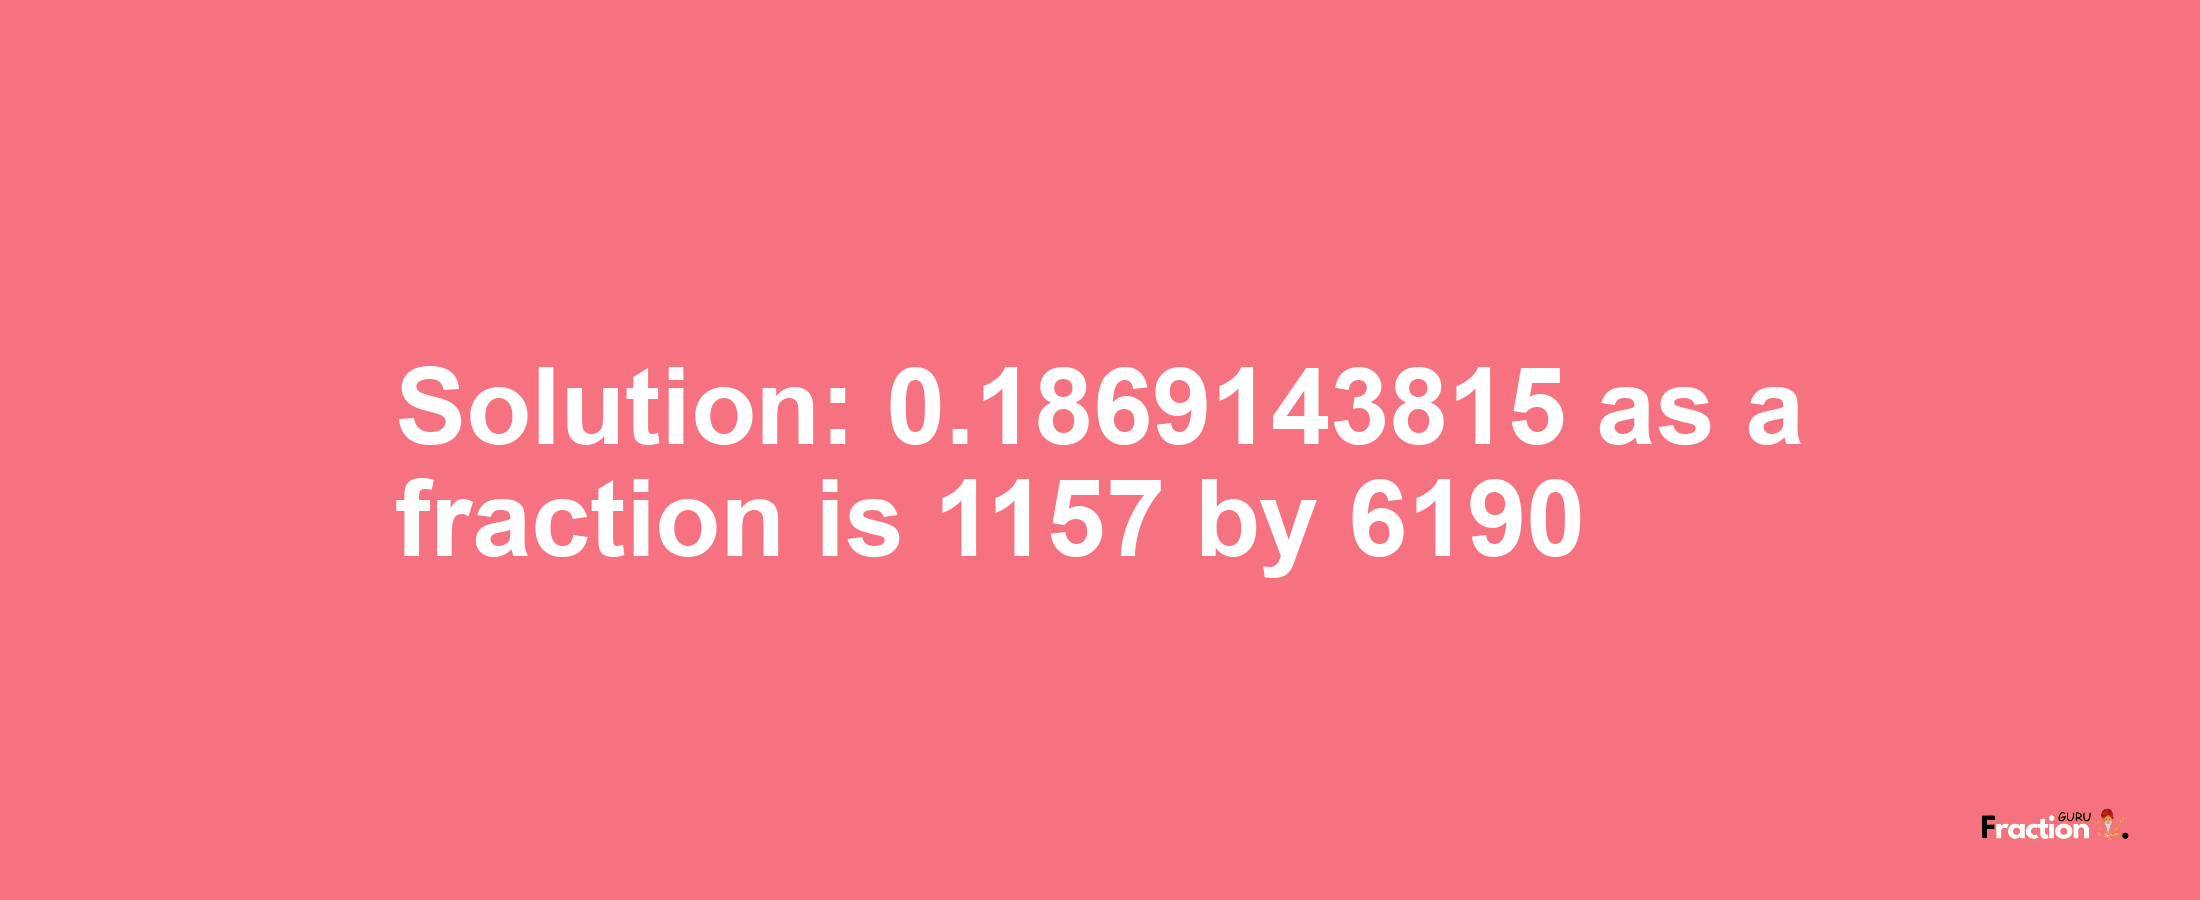 Solution:0.1869143815 as a fraction is 1157/6190